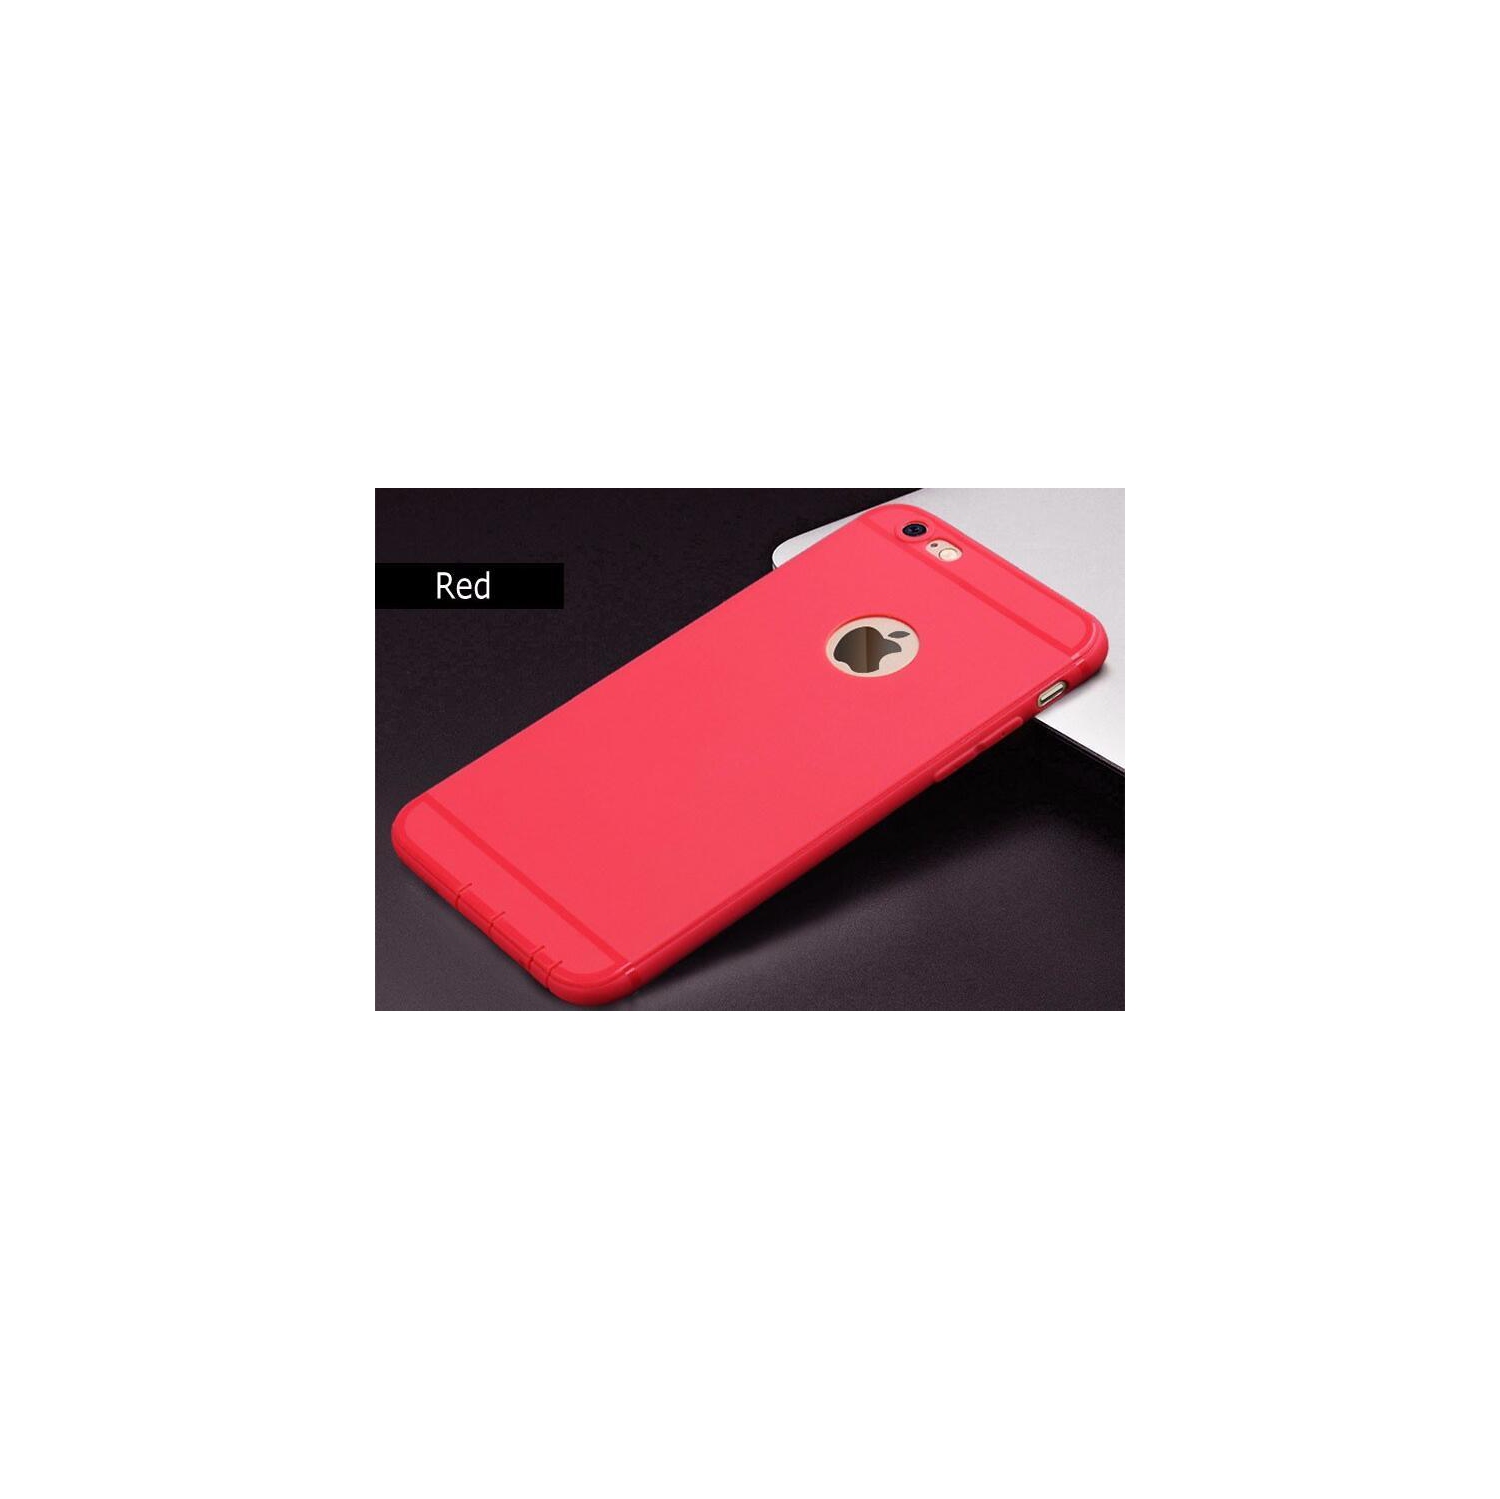 Ultra-Thin Matte Frosted Soft TPU Phone Case Candy Silicone Shockproof Cover For iPhone 7 / 8 (Red)